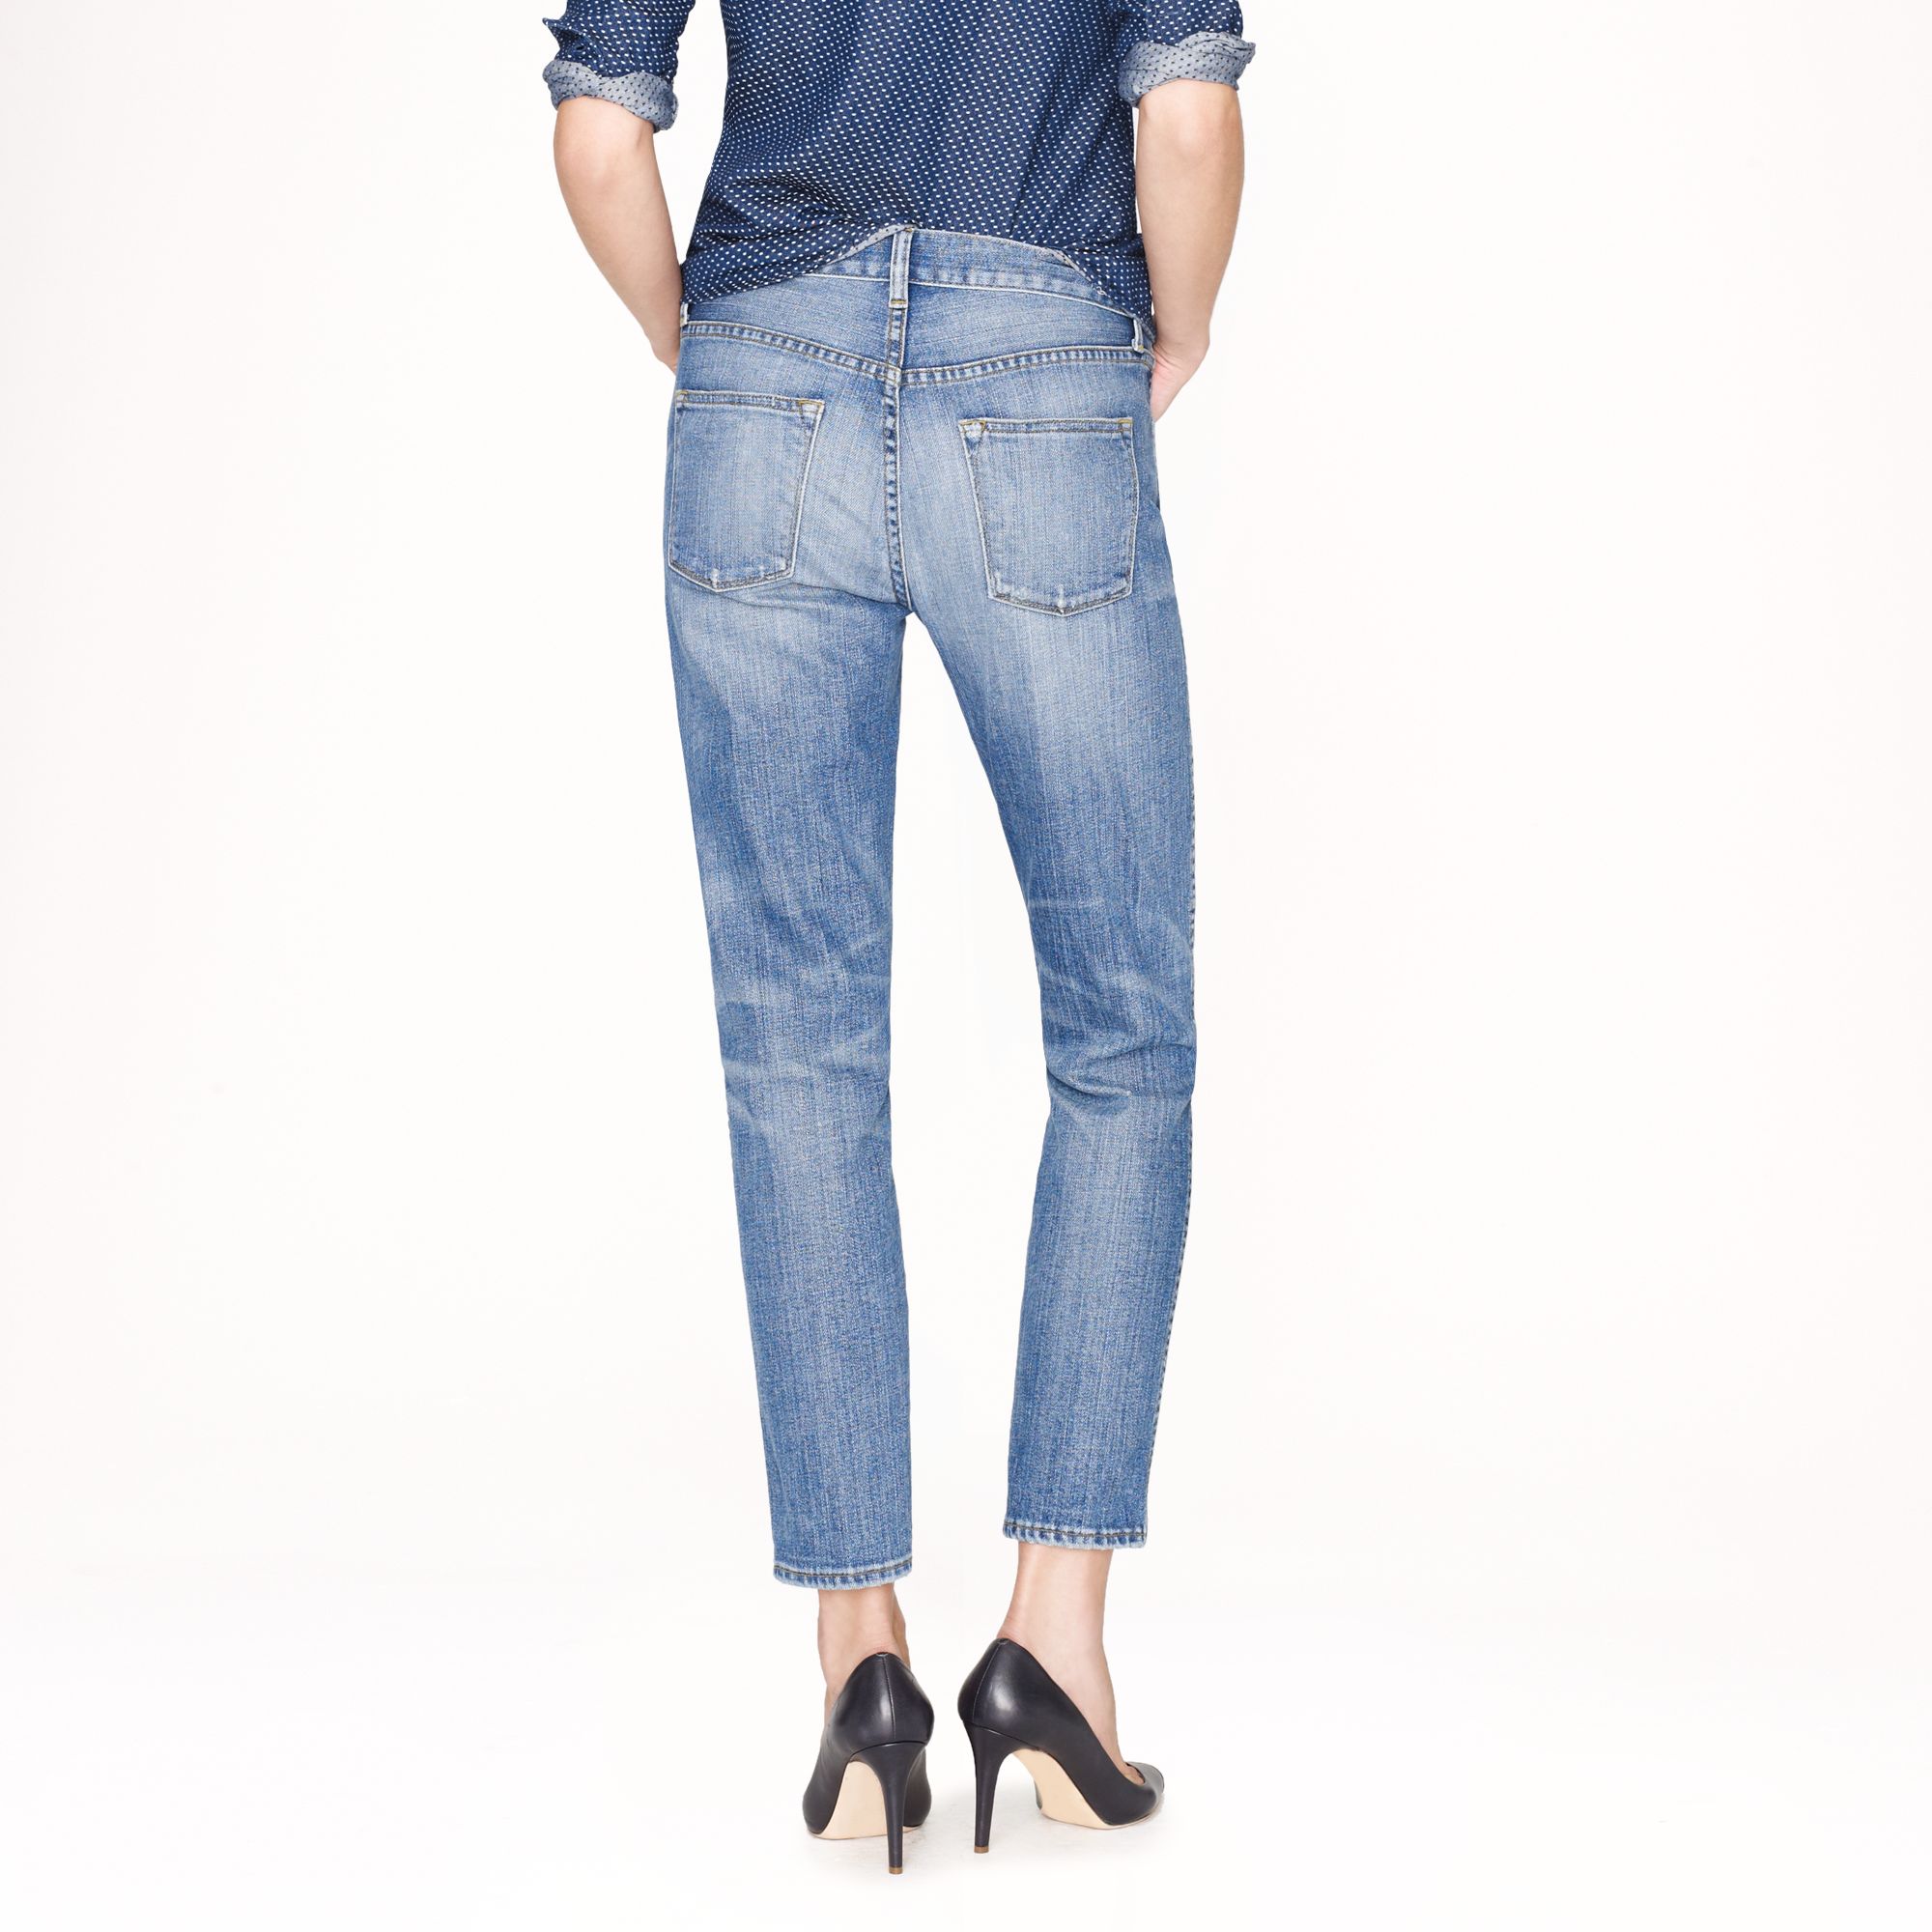 Lyst - J.Crew Cropped Vintage Straight Jean in Cascade Wash in Blue